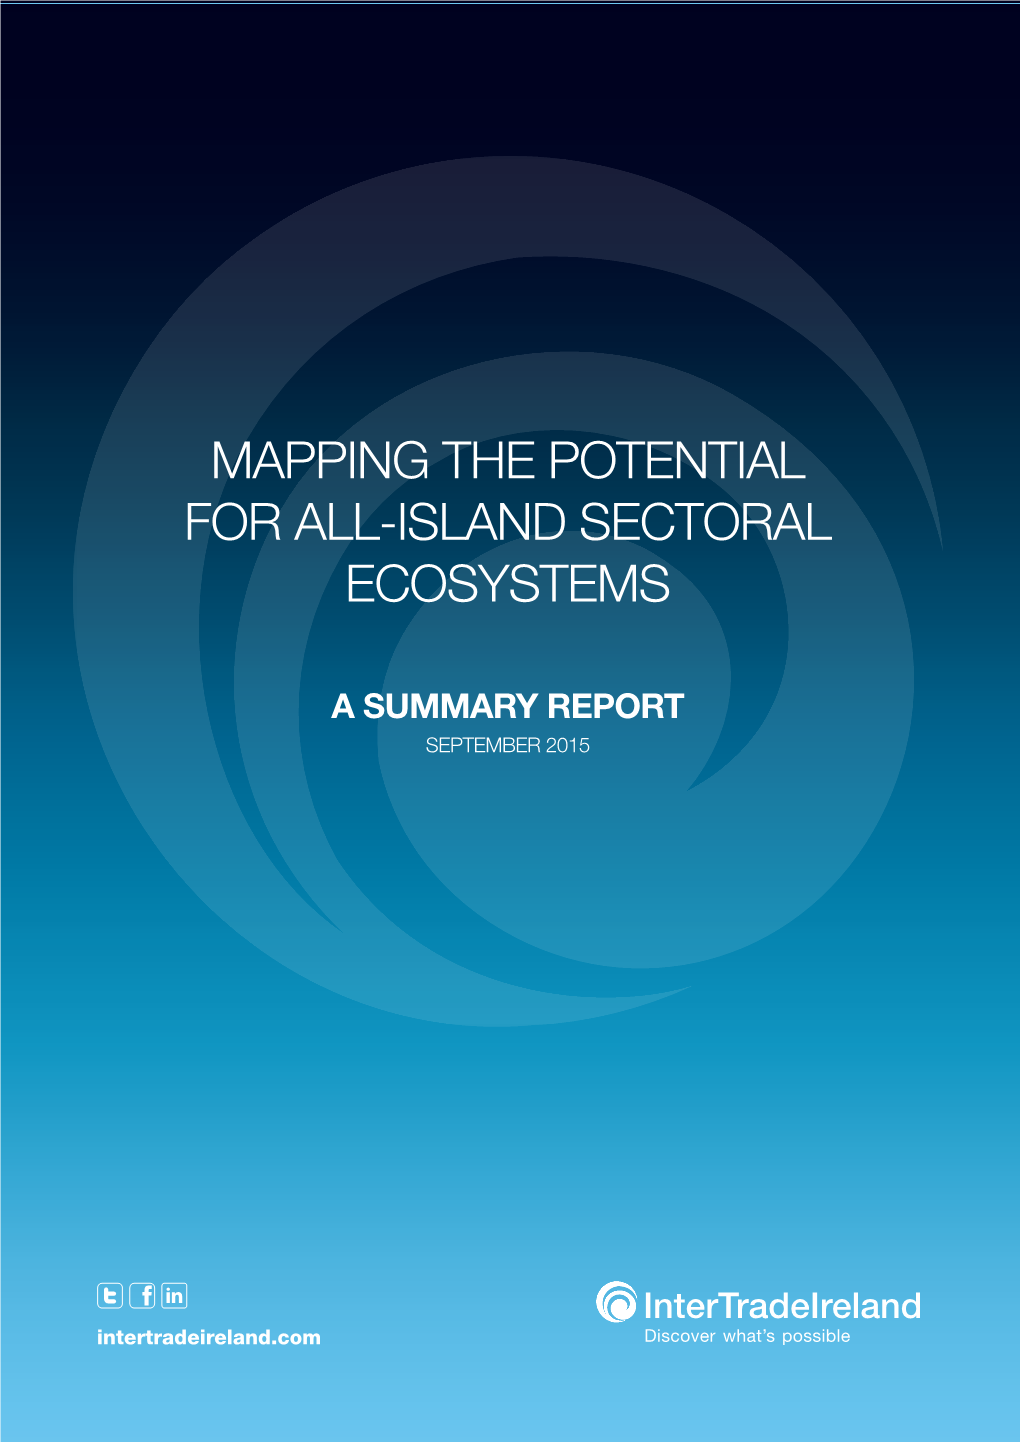 Mapping the Potential for All-Island Sectoral Ecosystems